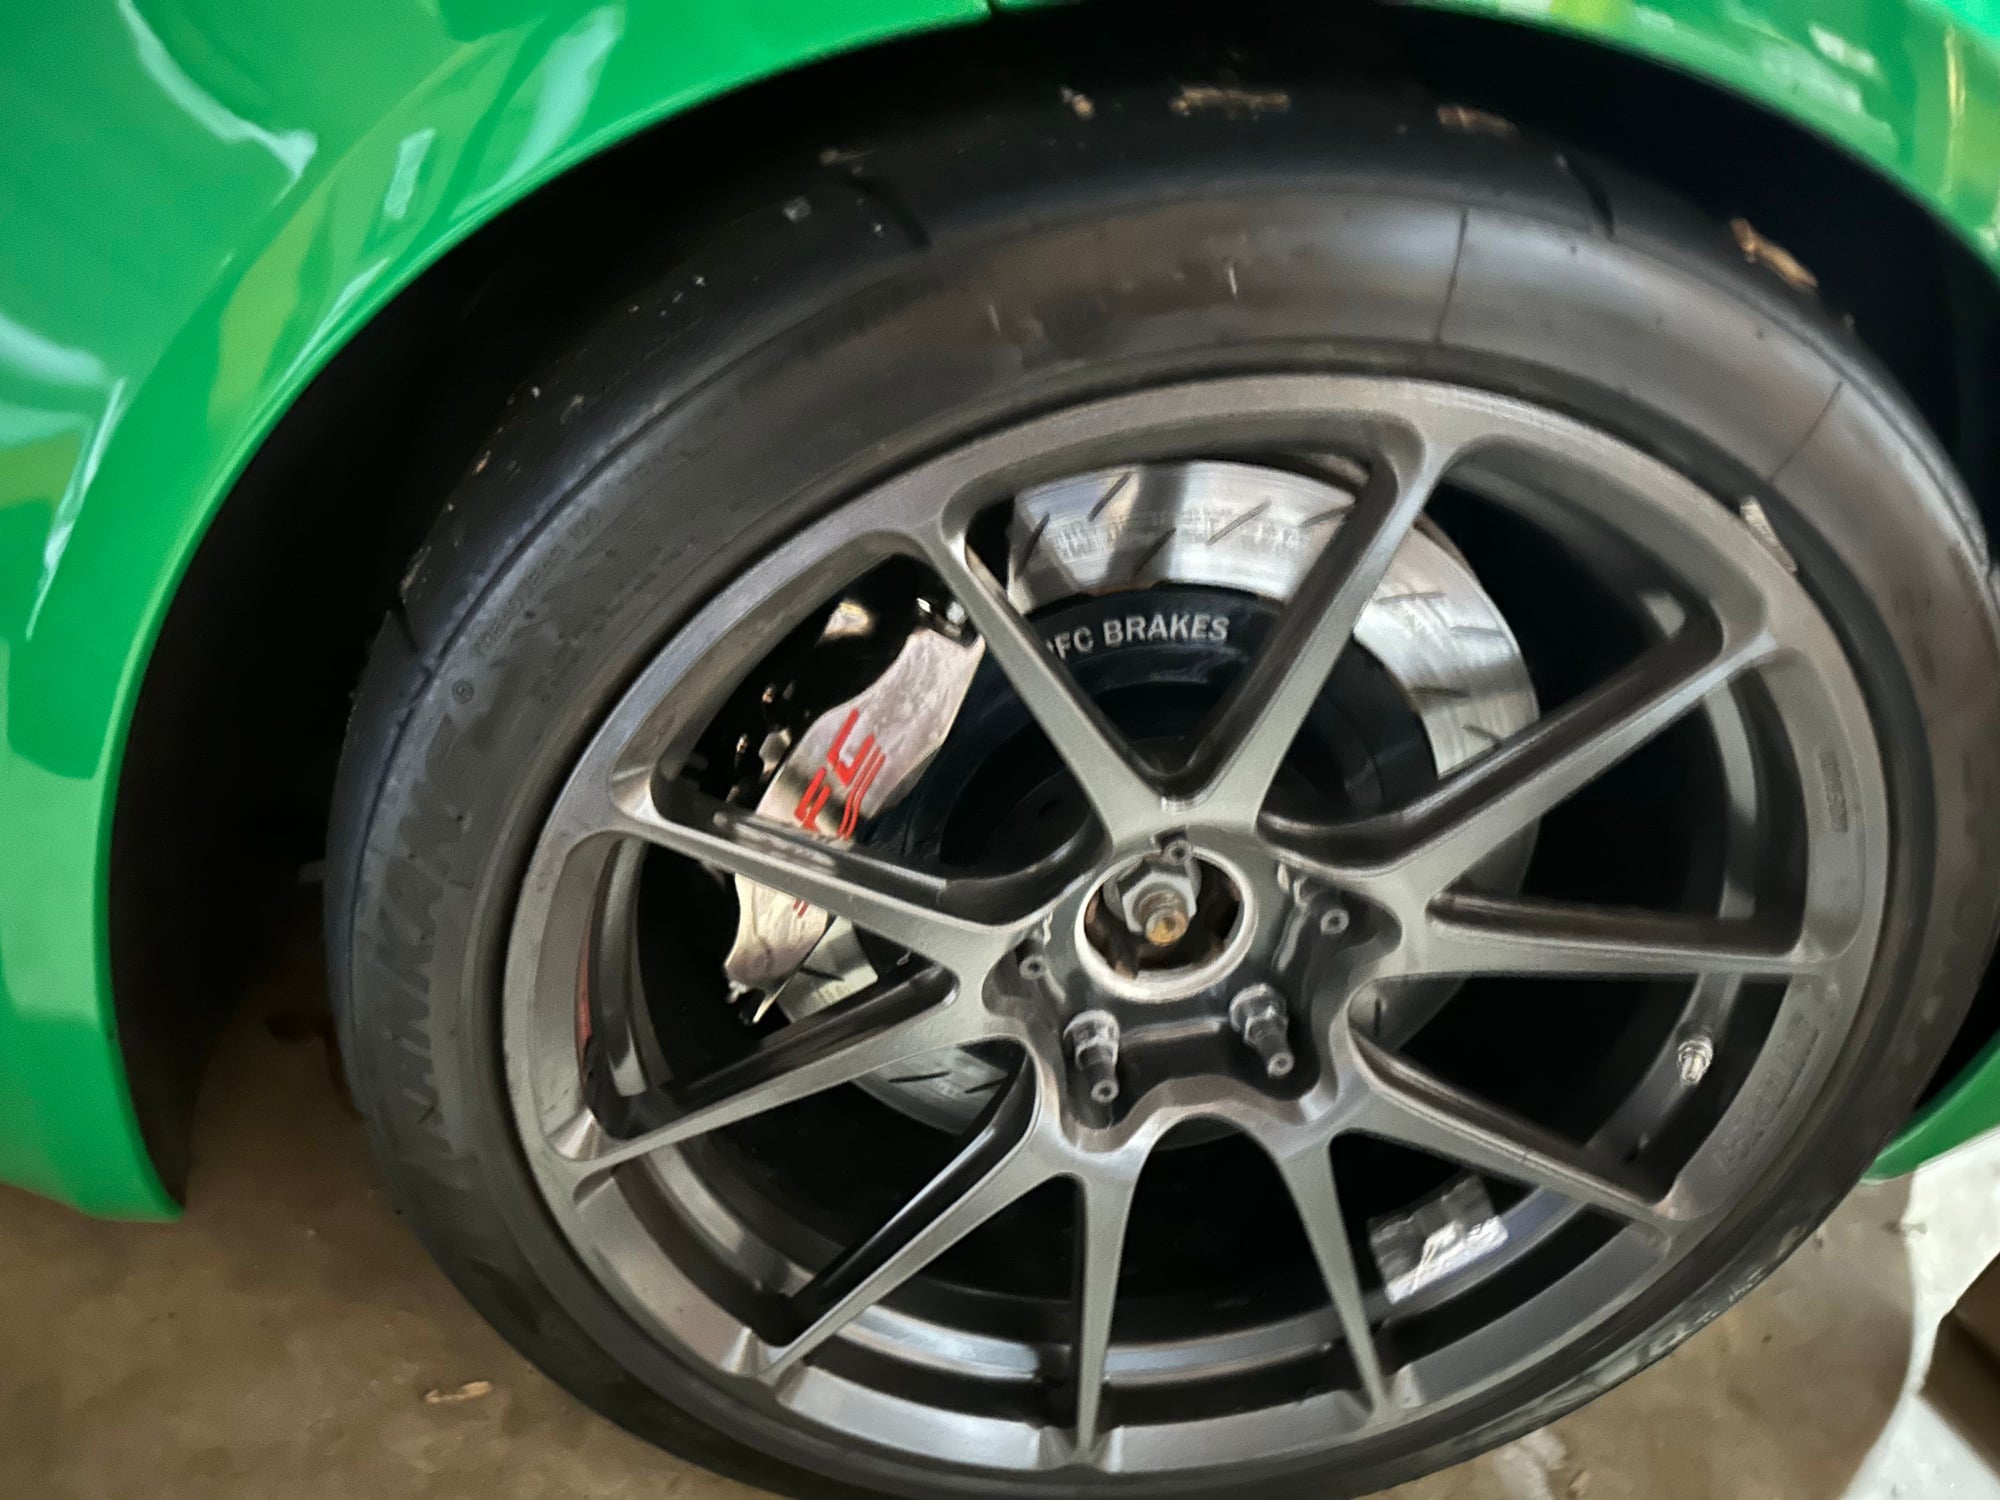 Accessories - Forgeline GS1R package for GT4 - Used - 0  All Models - Chadds Ford, PA 19317, United States